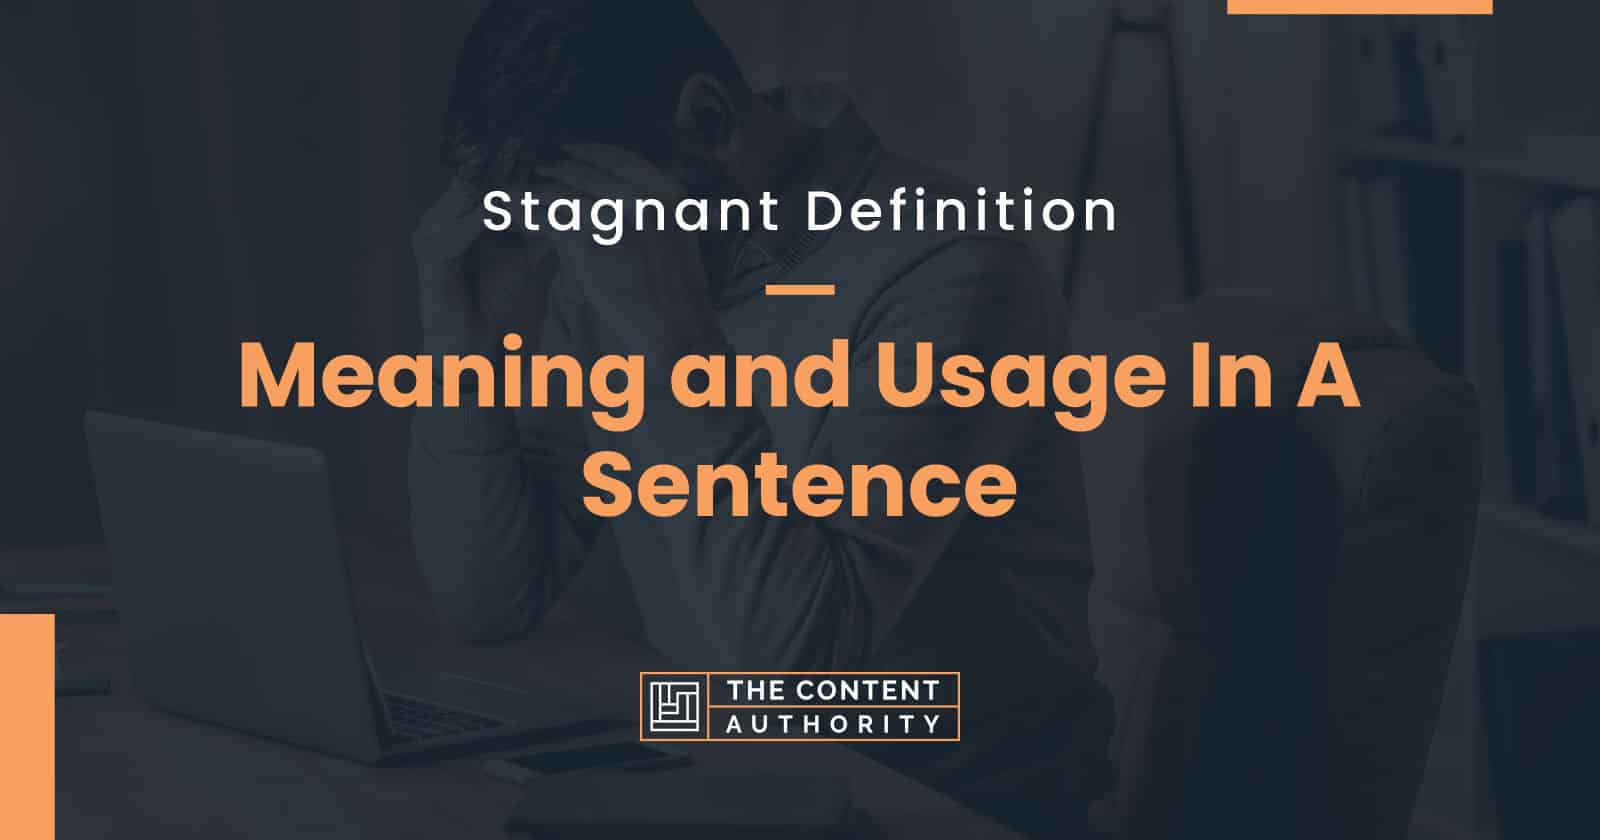 Stagnant Definition – Meaning And Usage In A Sentence